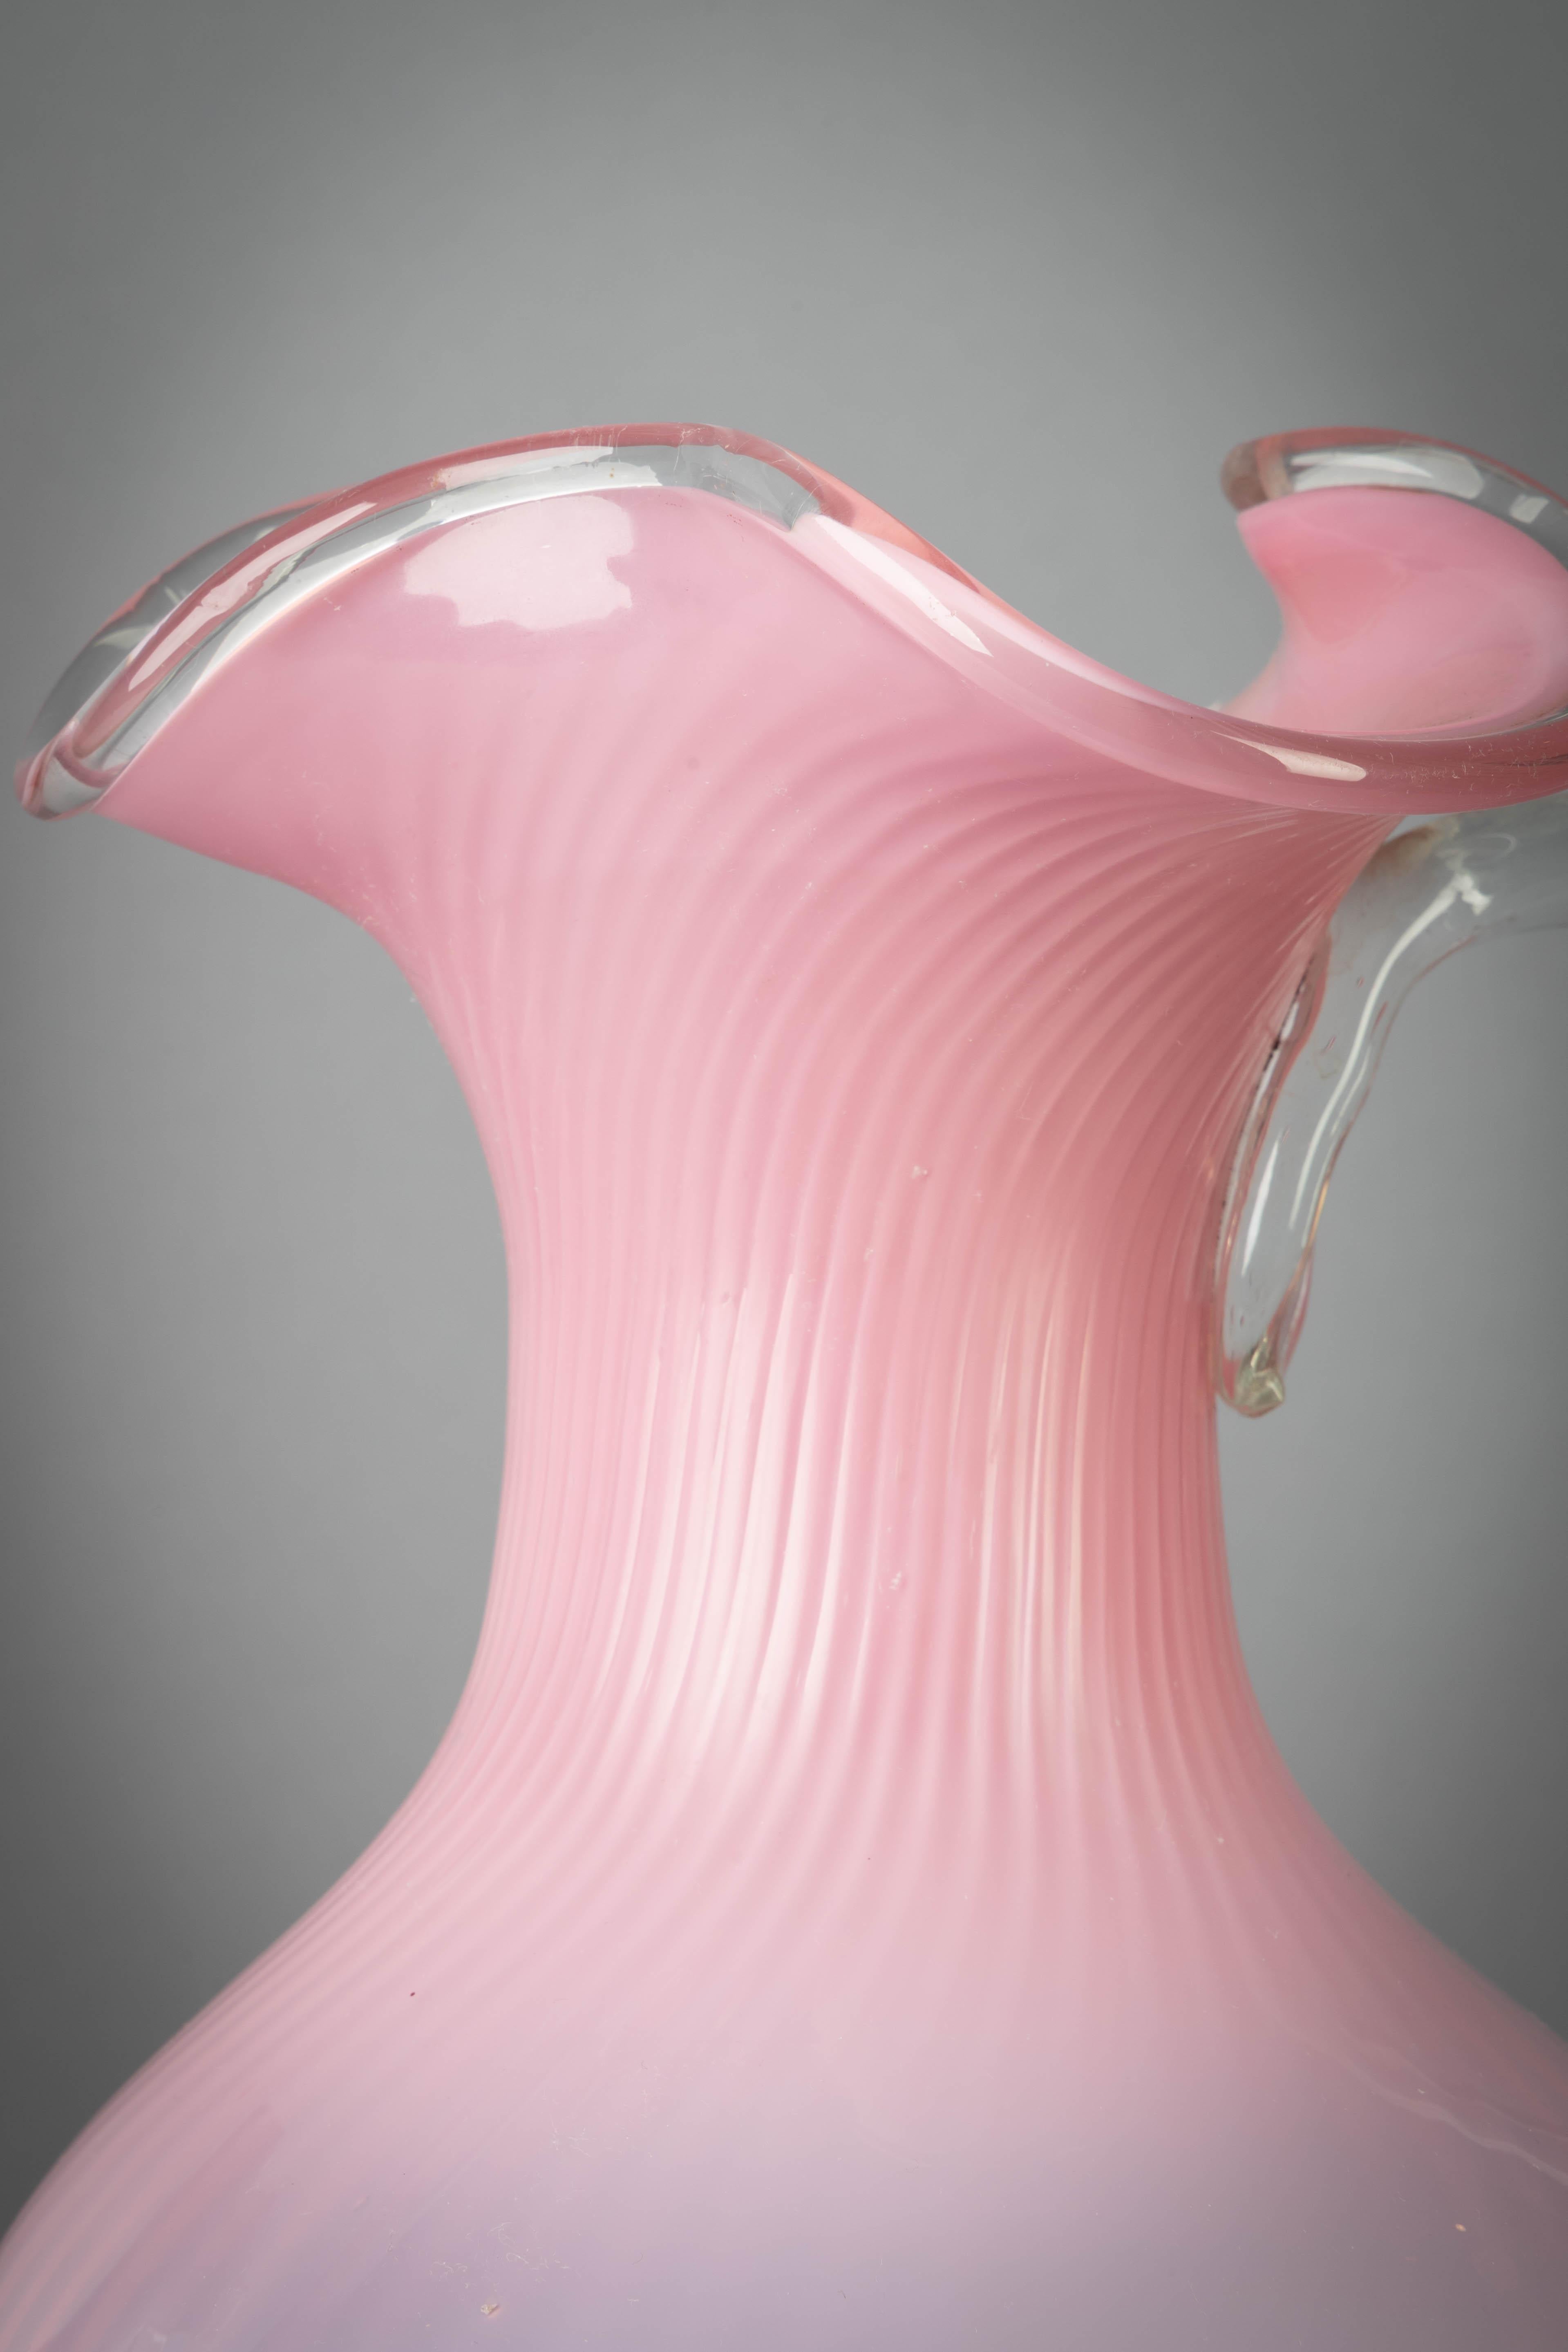 Each of spiral-fluted form with trefoil necks and applied clear glass handles, on circular bases.